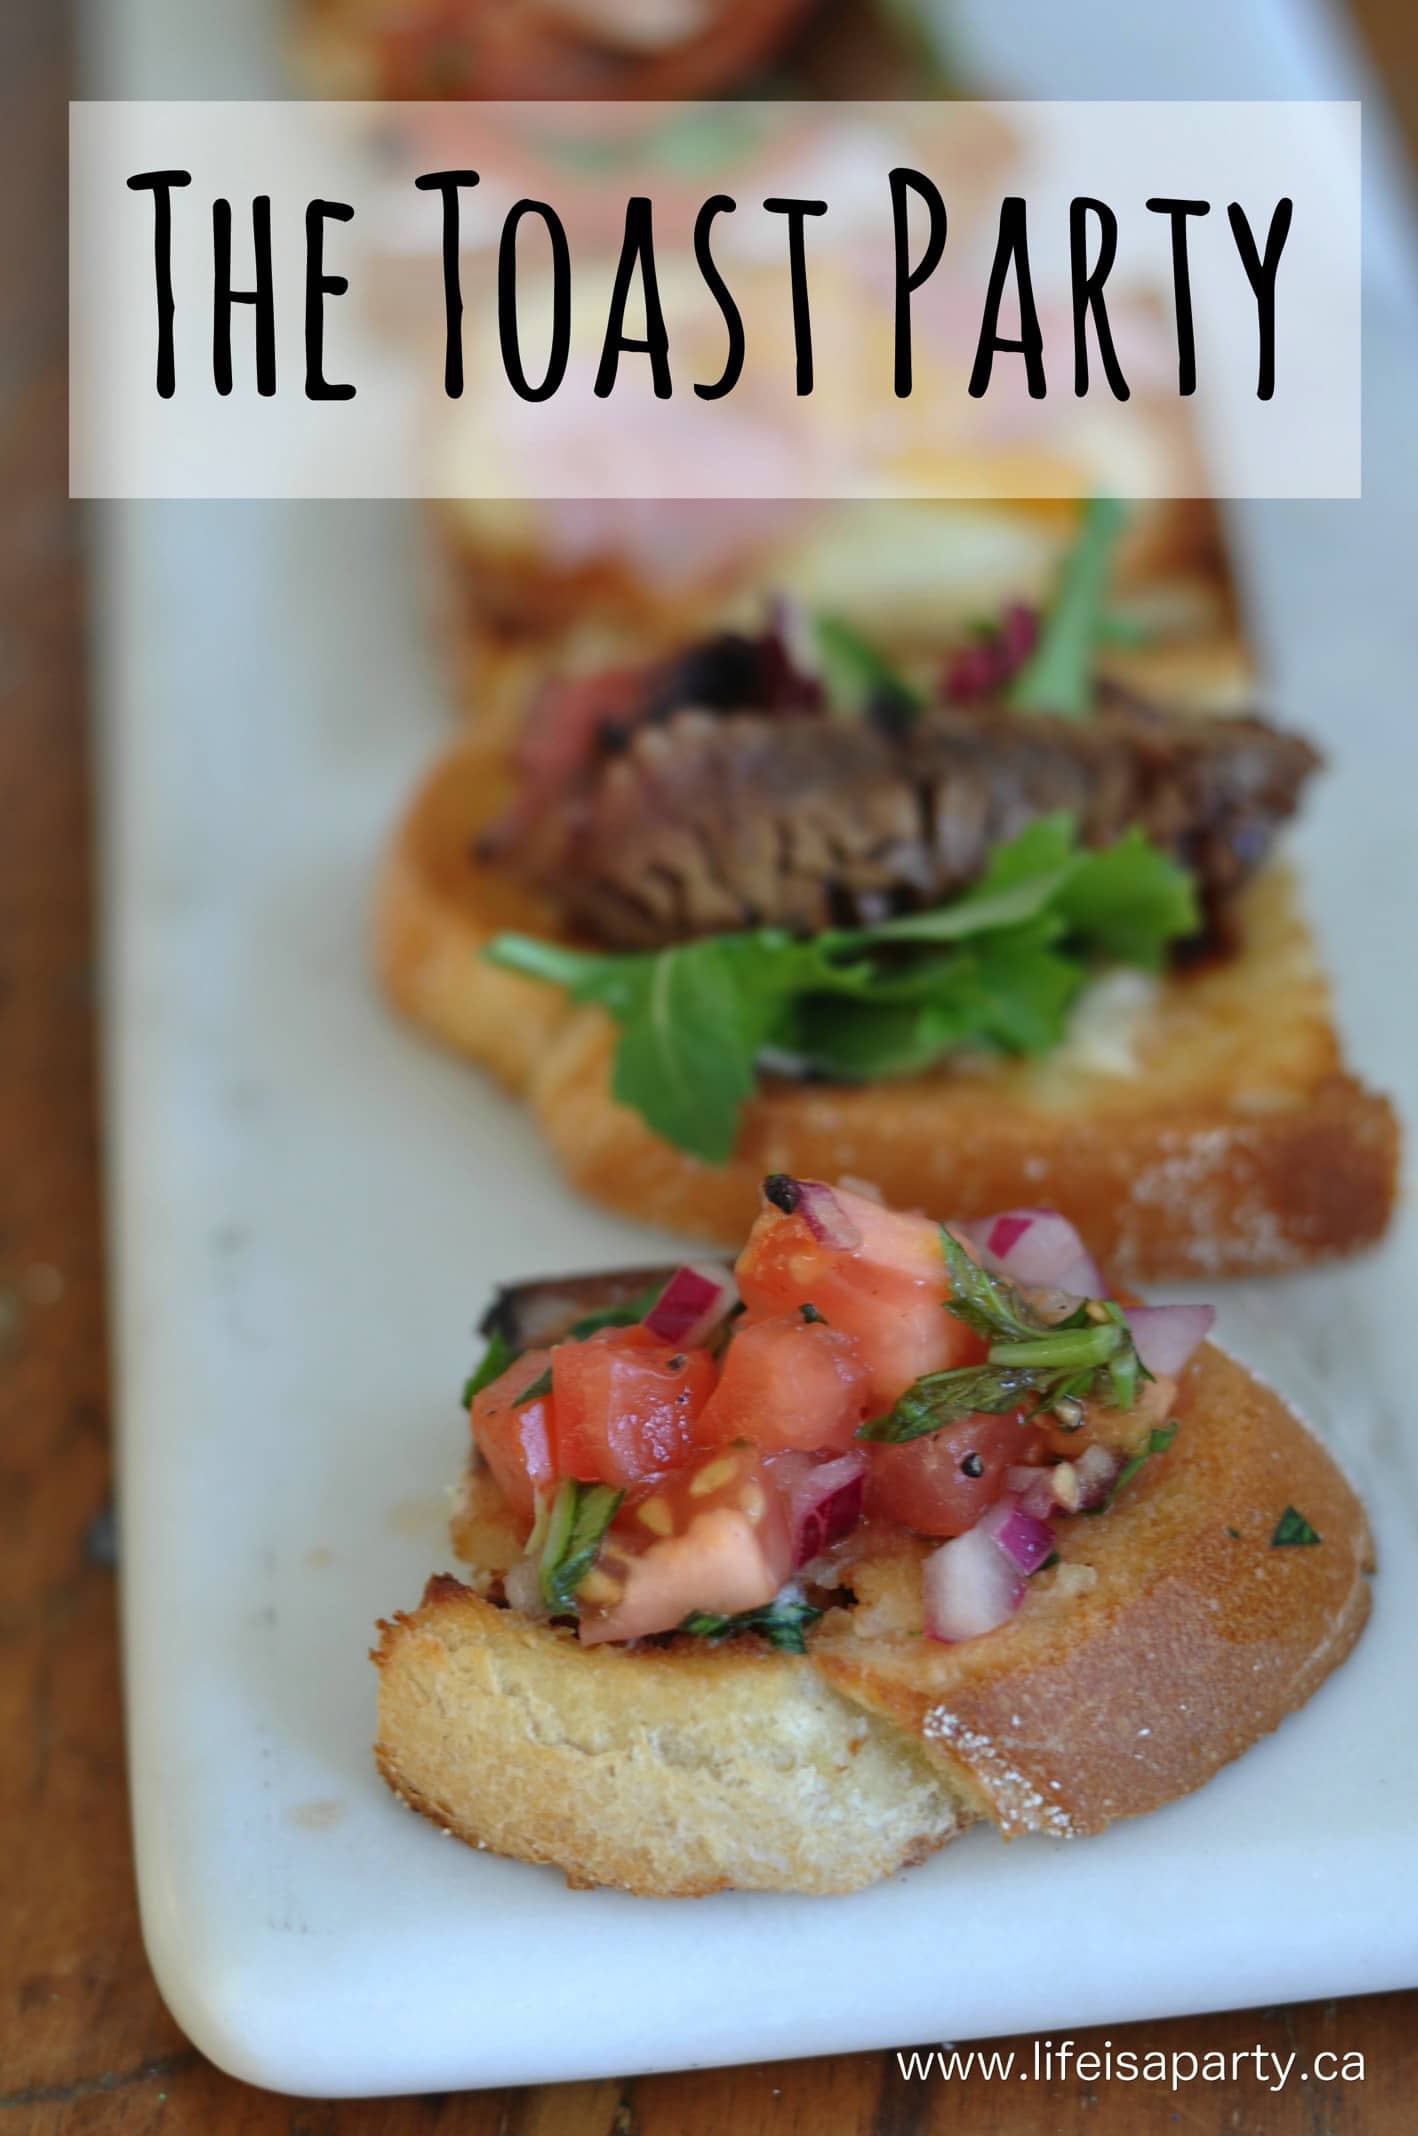 The Toast Party